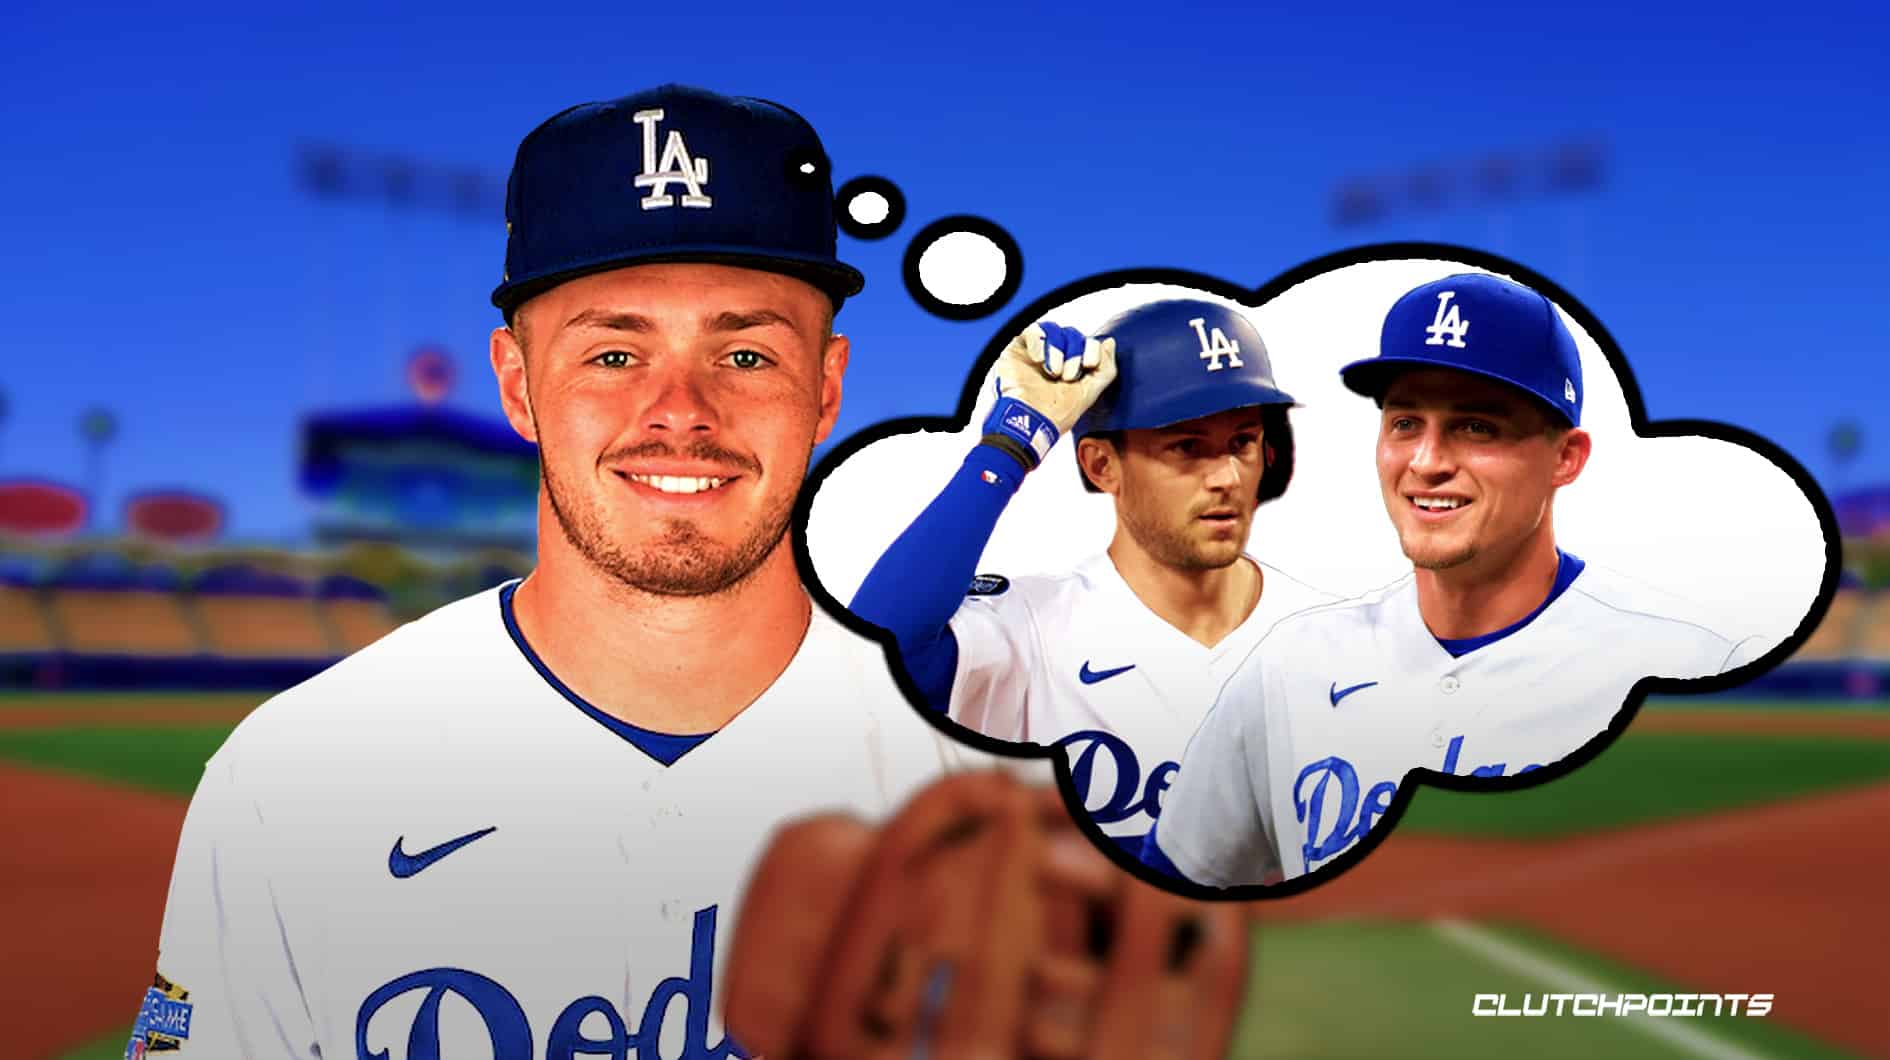 Unflappable Corey Seager Has Talent the Dodgers Can Nurture - The